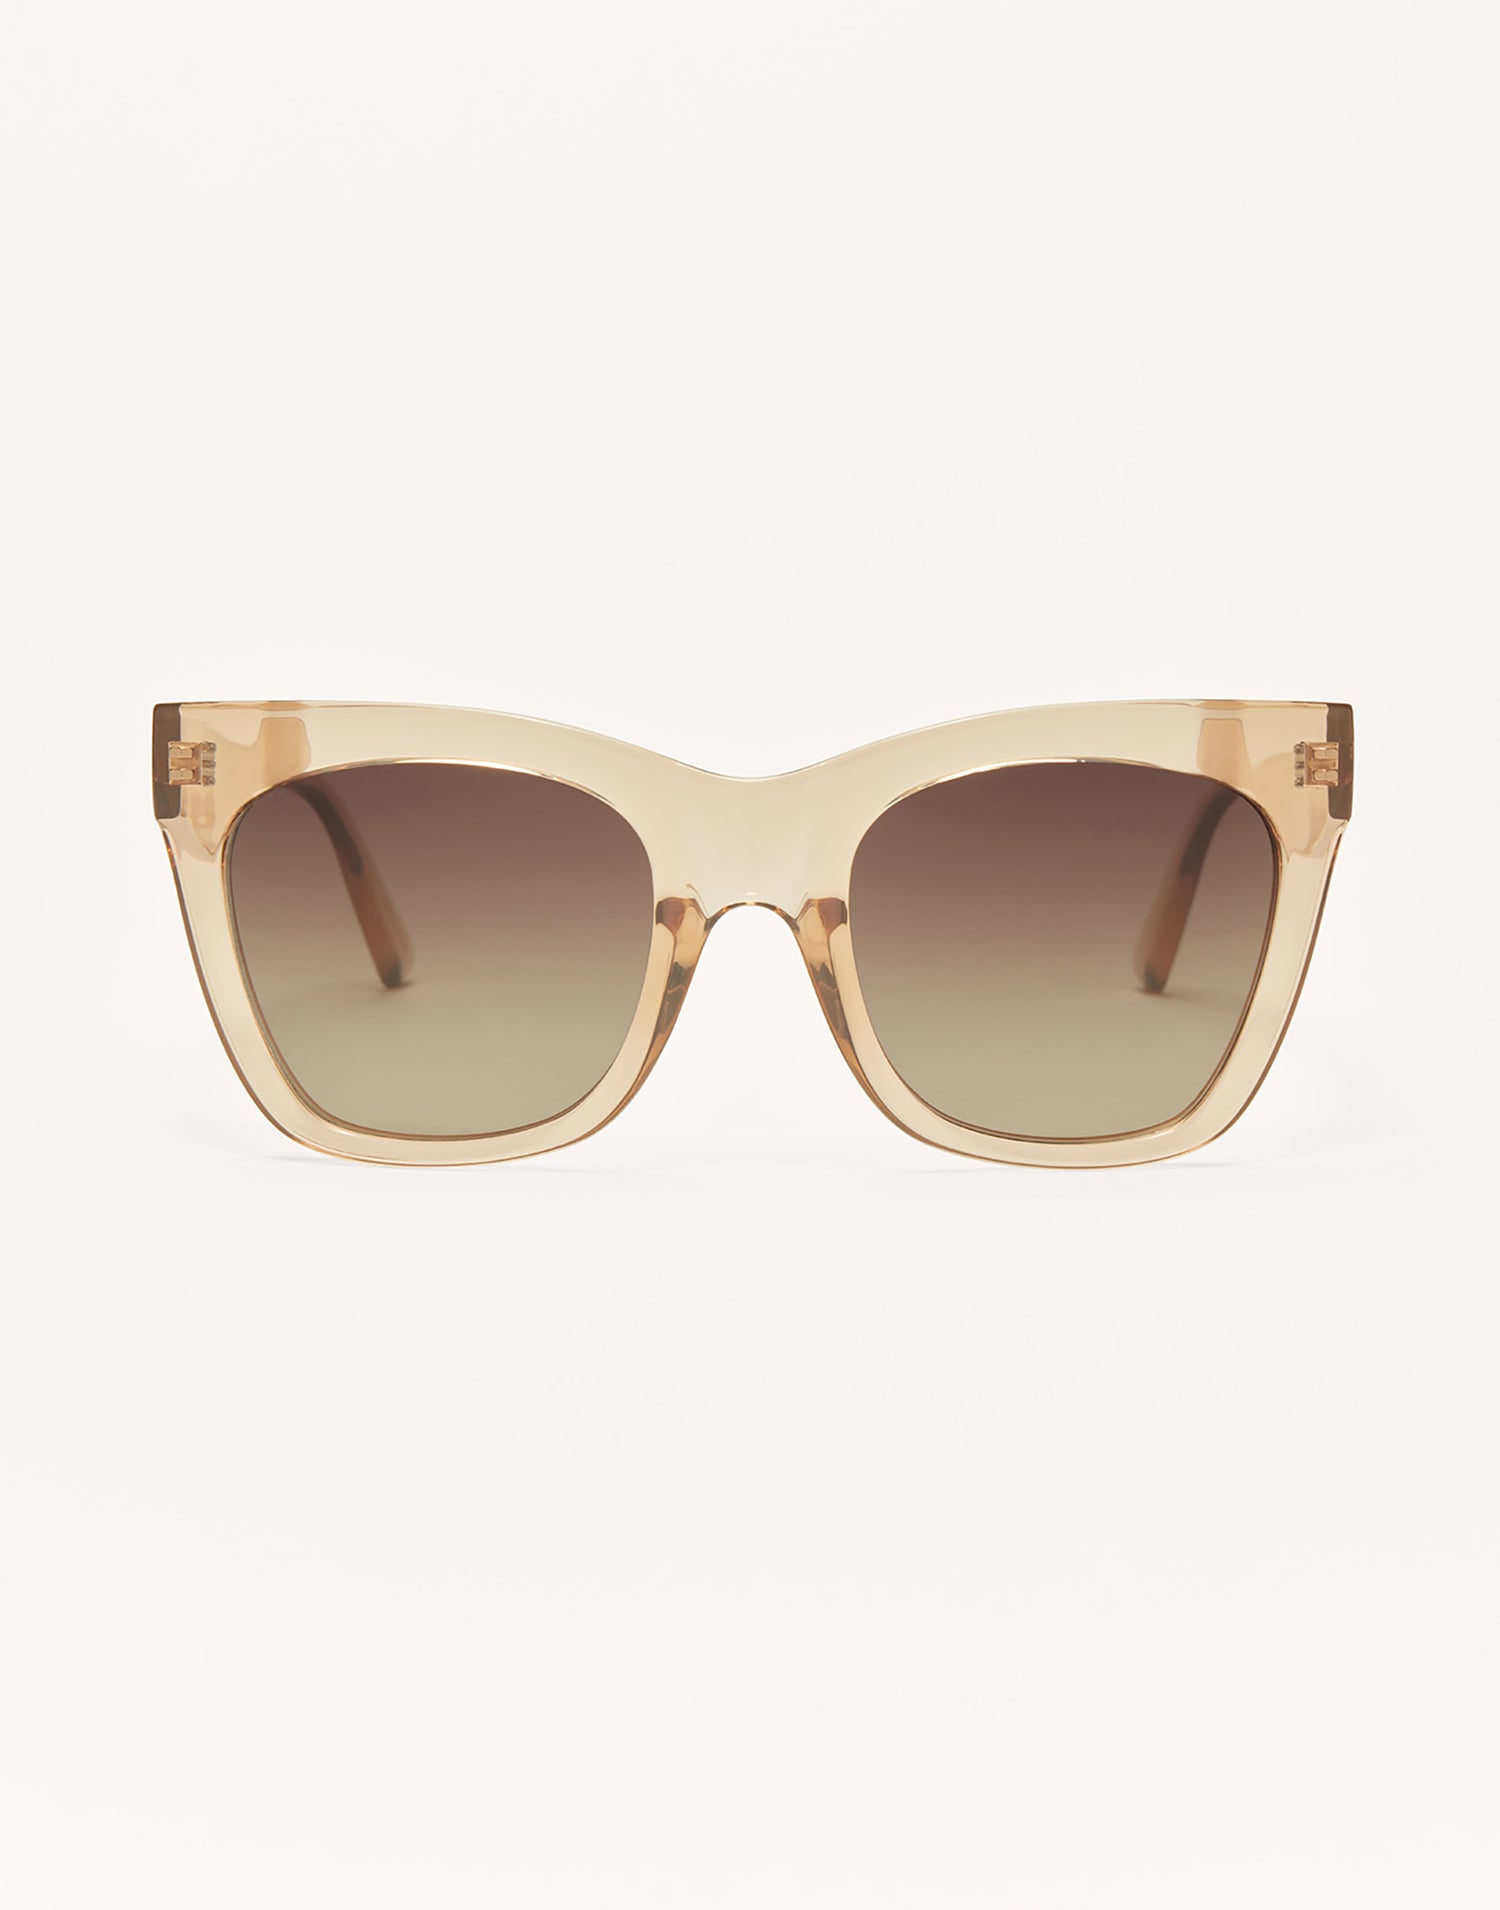 Everyday Sunglasses by Z Supply in Champagne - Front View